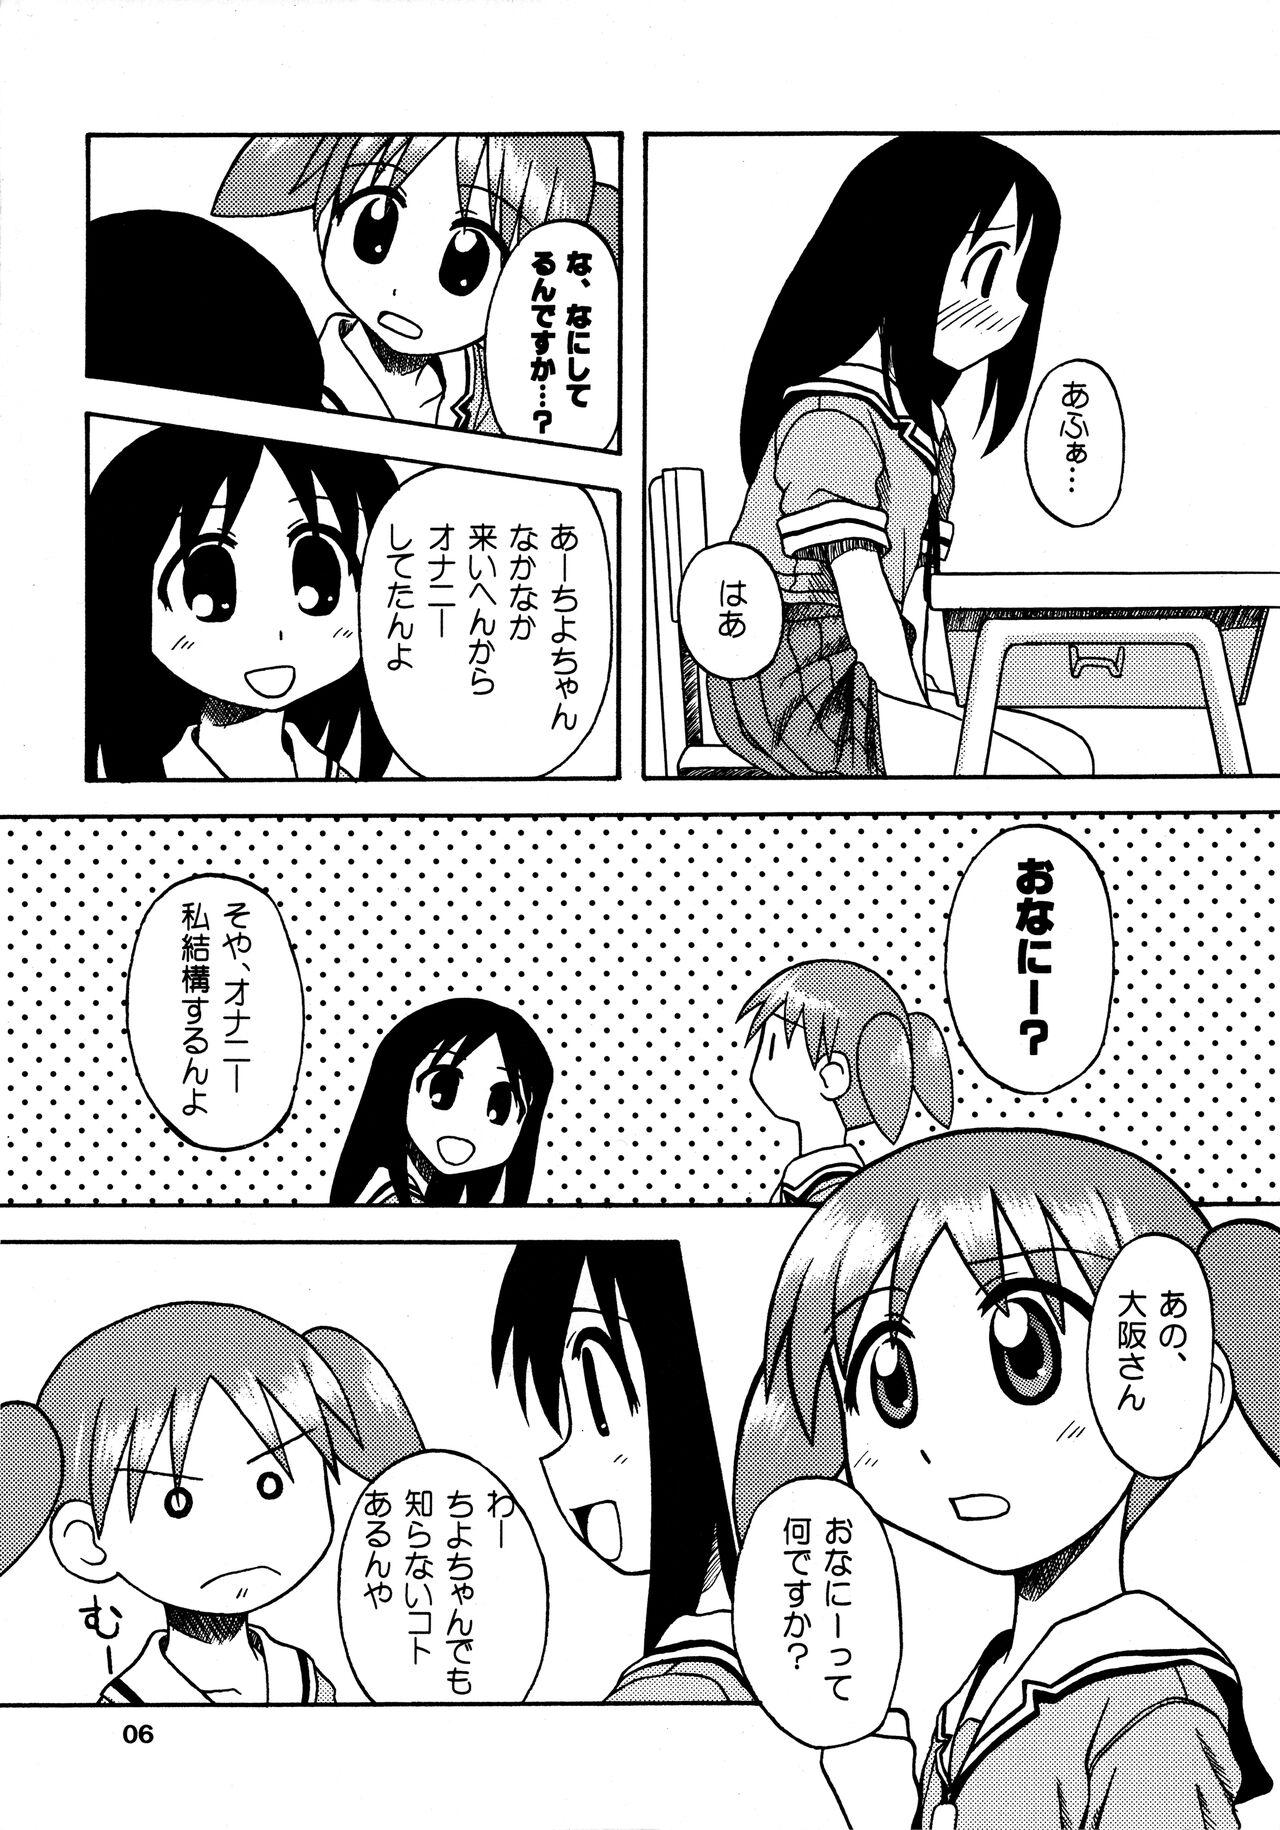 Soapy ANOTHER LIFE - Azumanga daioh Sexo - Page 6